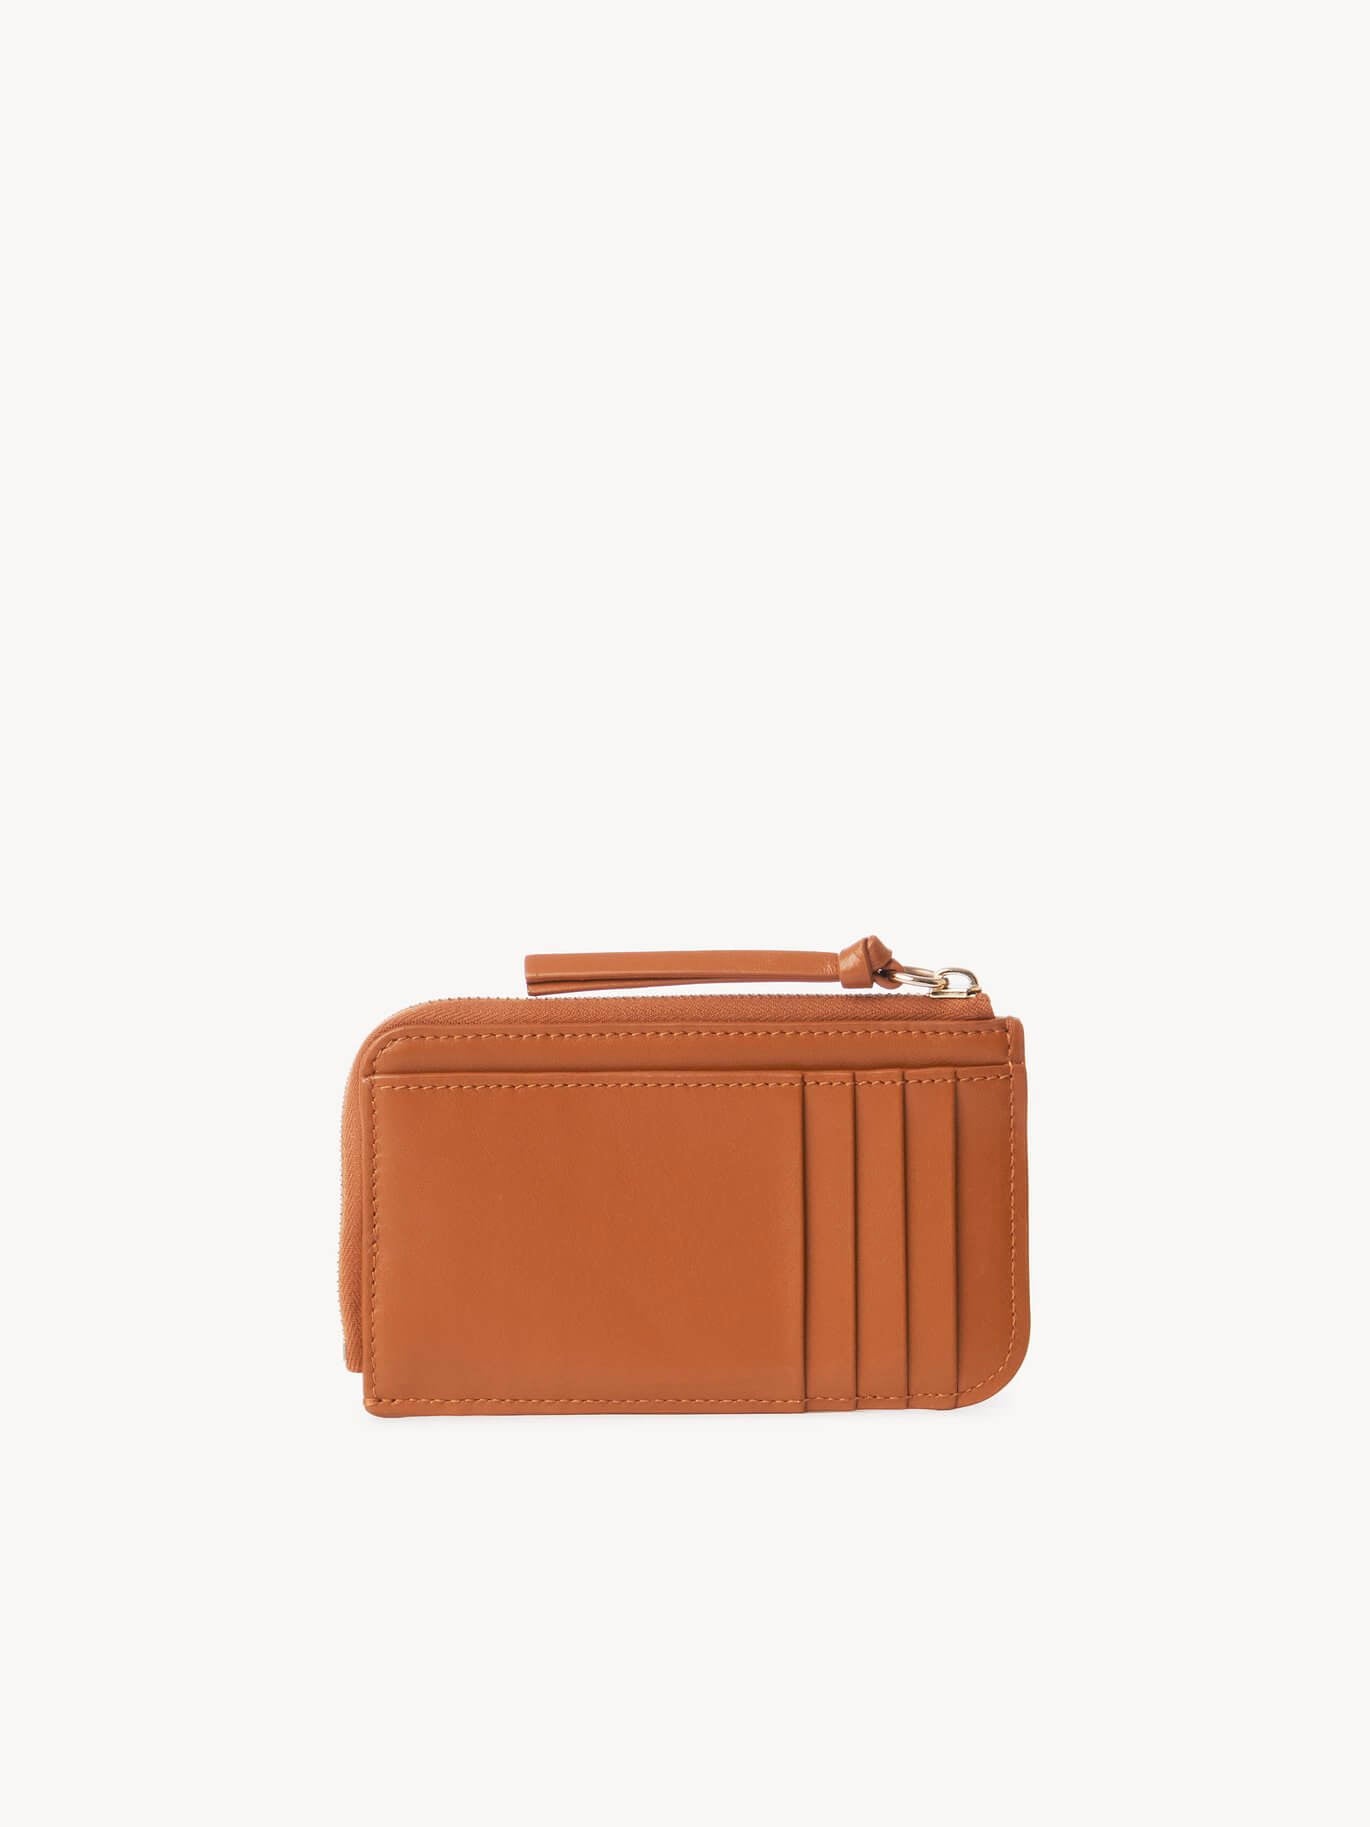 Chloe Sense Small Purse With Card Slots in Caramel available at The New Trend